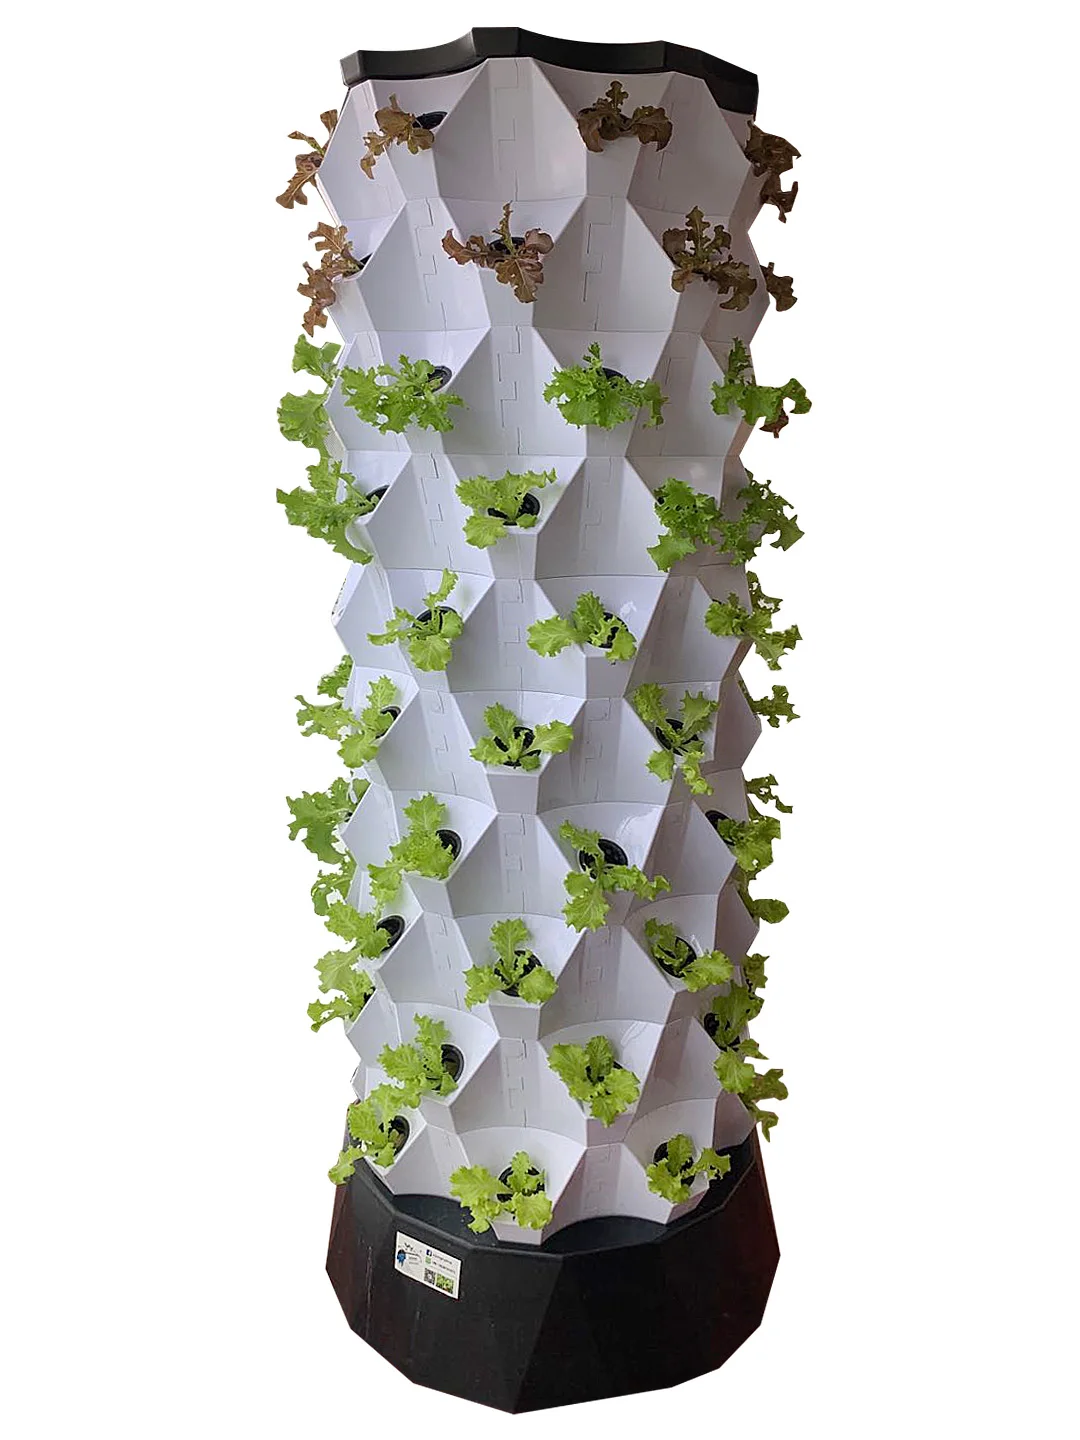 Skyplant New Agricultural Greenhouse Rotary Aeroponic Tower Garden